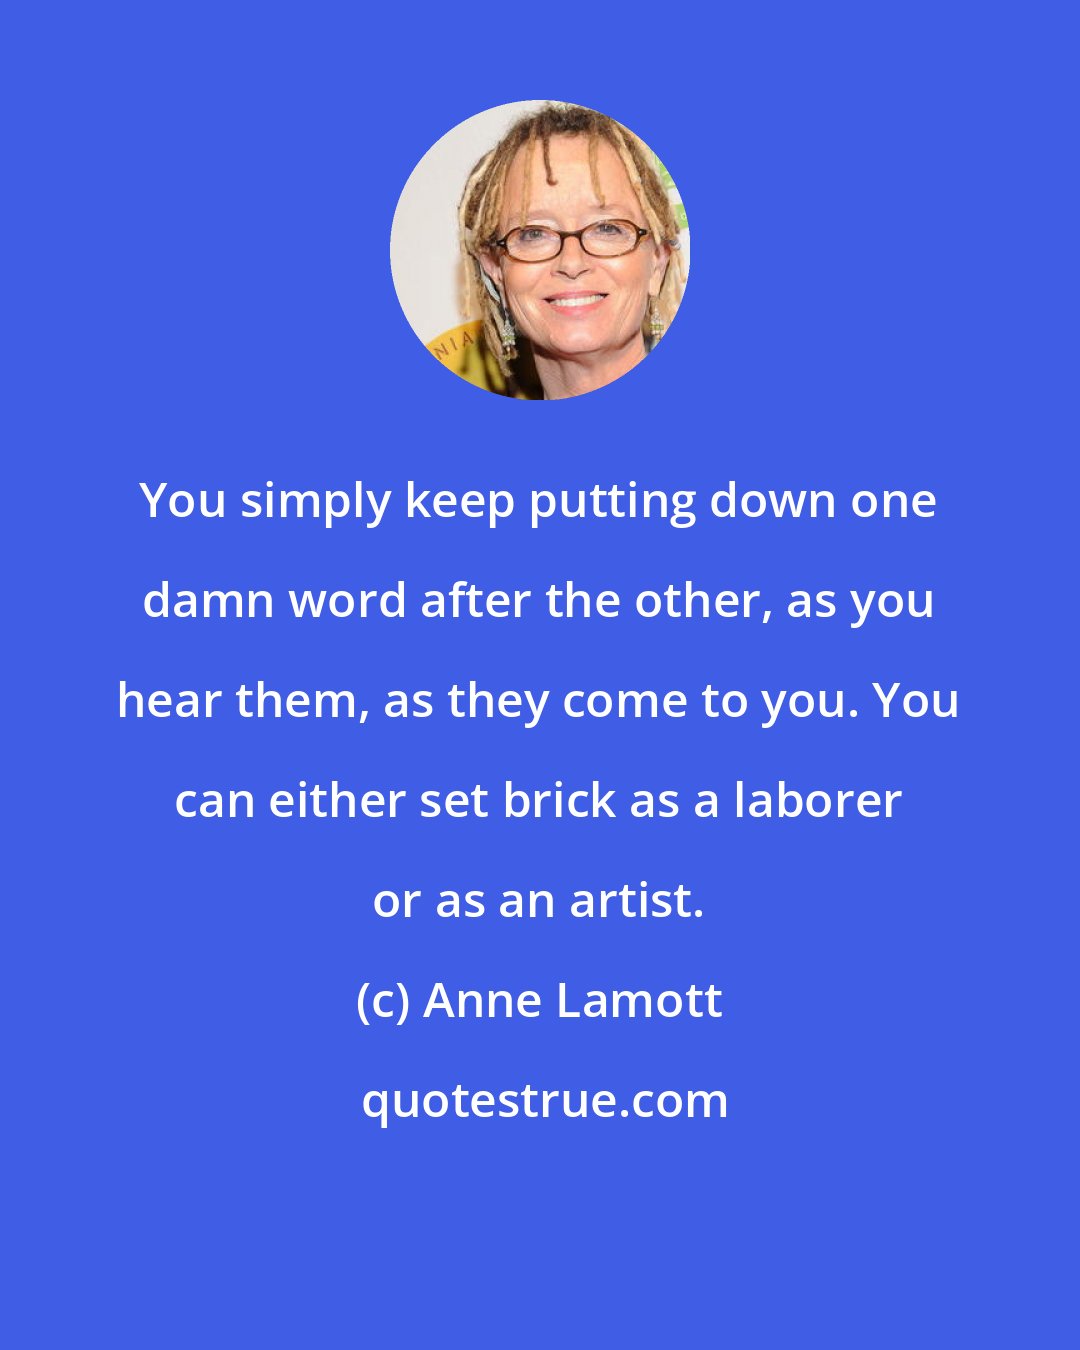 Anne Lamott: You simply keep putting down one damn word after the other, as you hear them, as they come to you. You can either set brick as a laborer or as an artist.